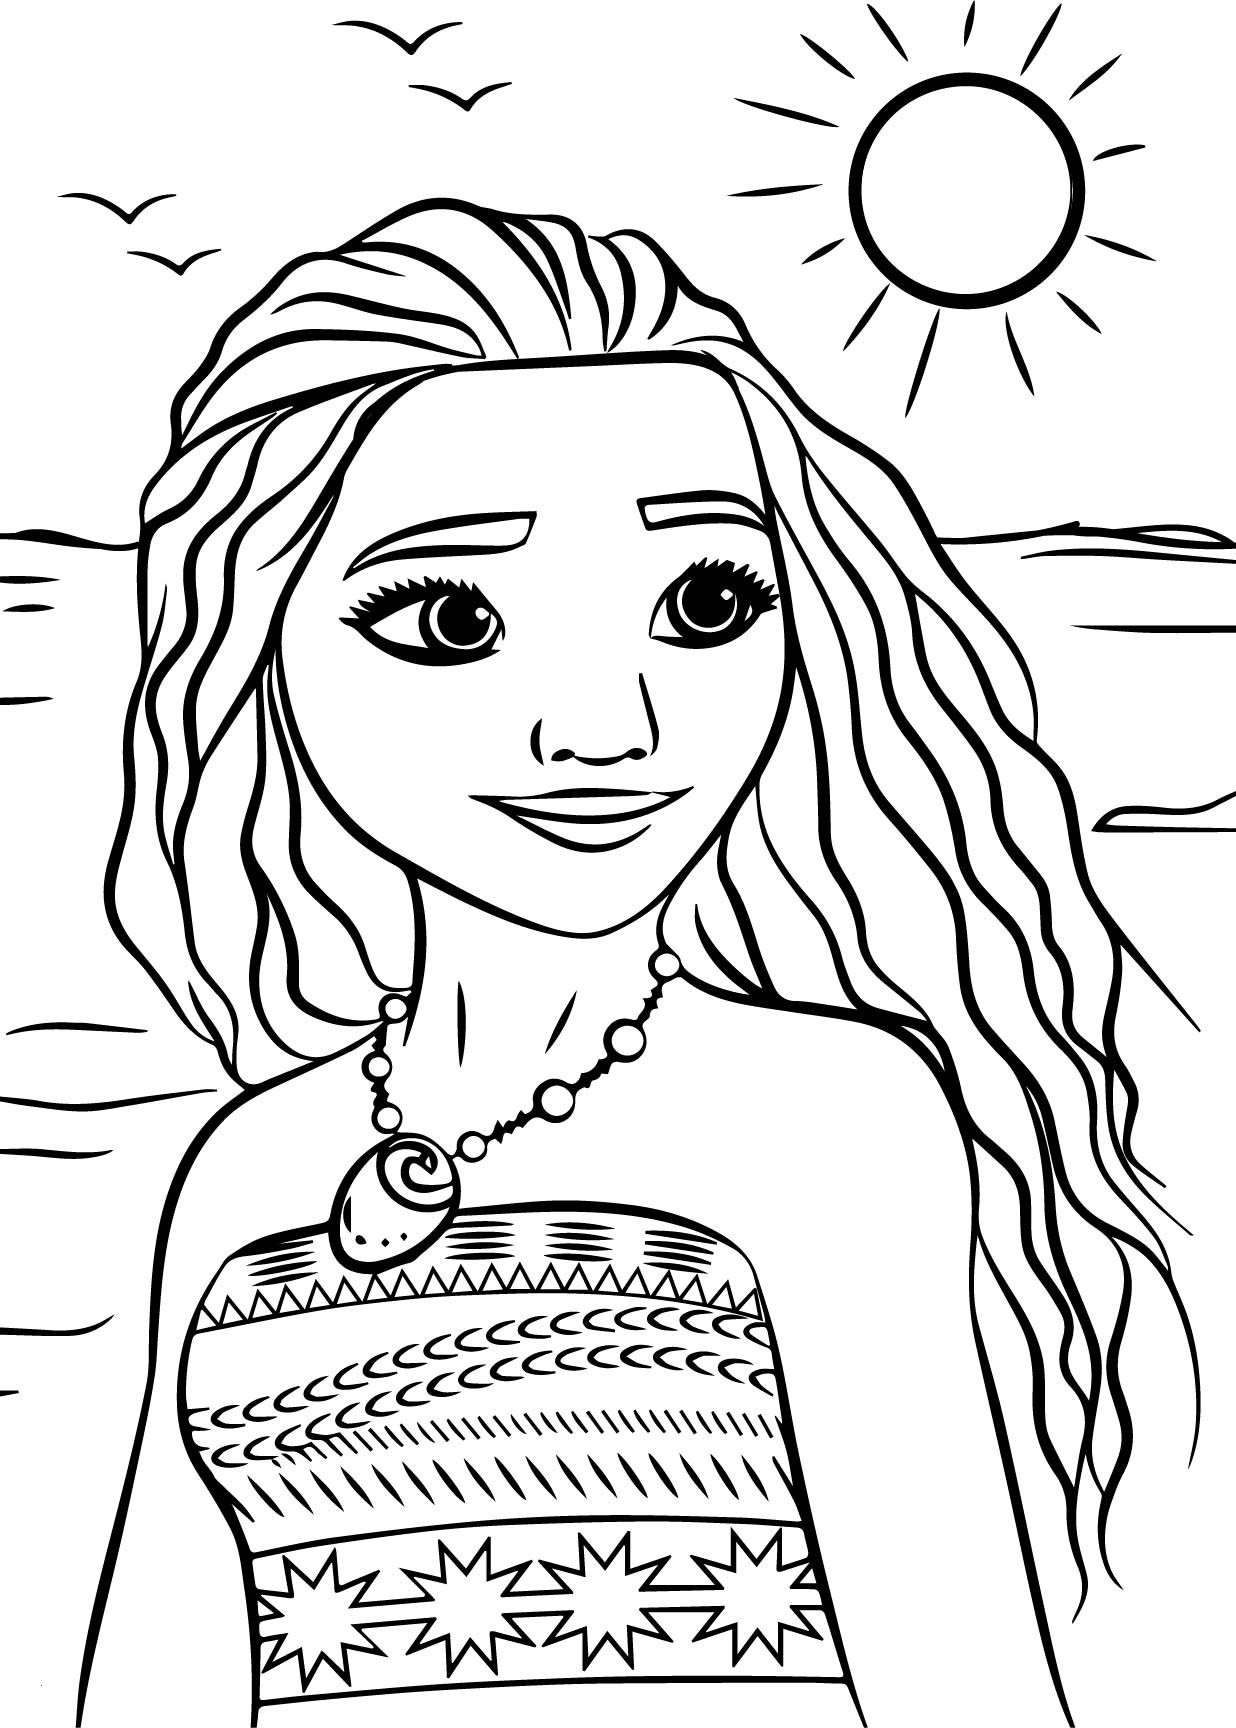 Coloring Book  Barbie Princess Coloring Pages To Print ...